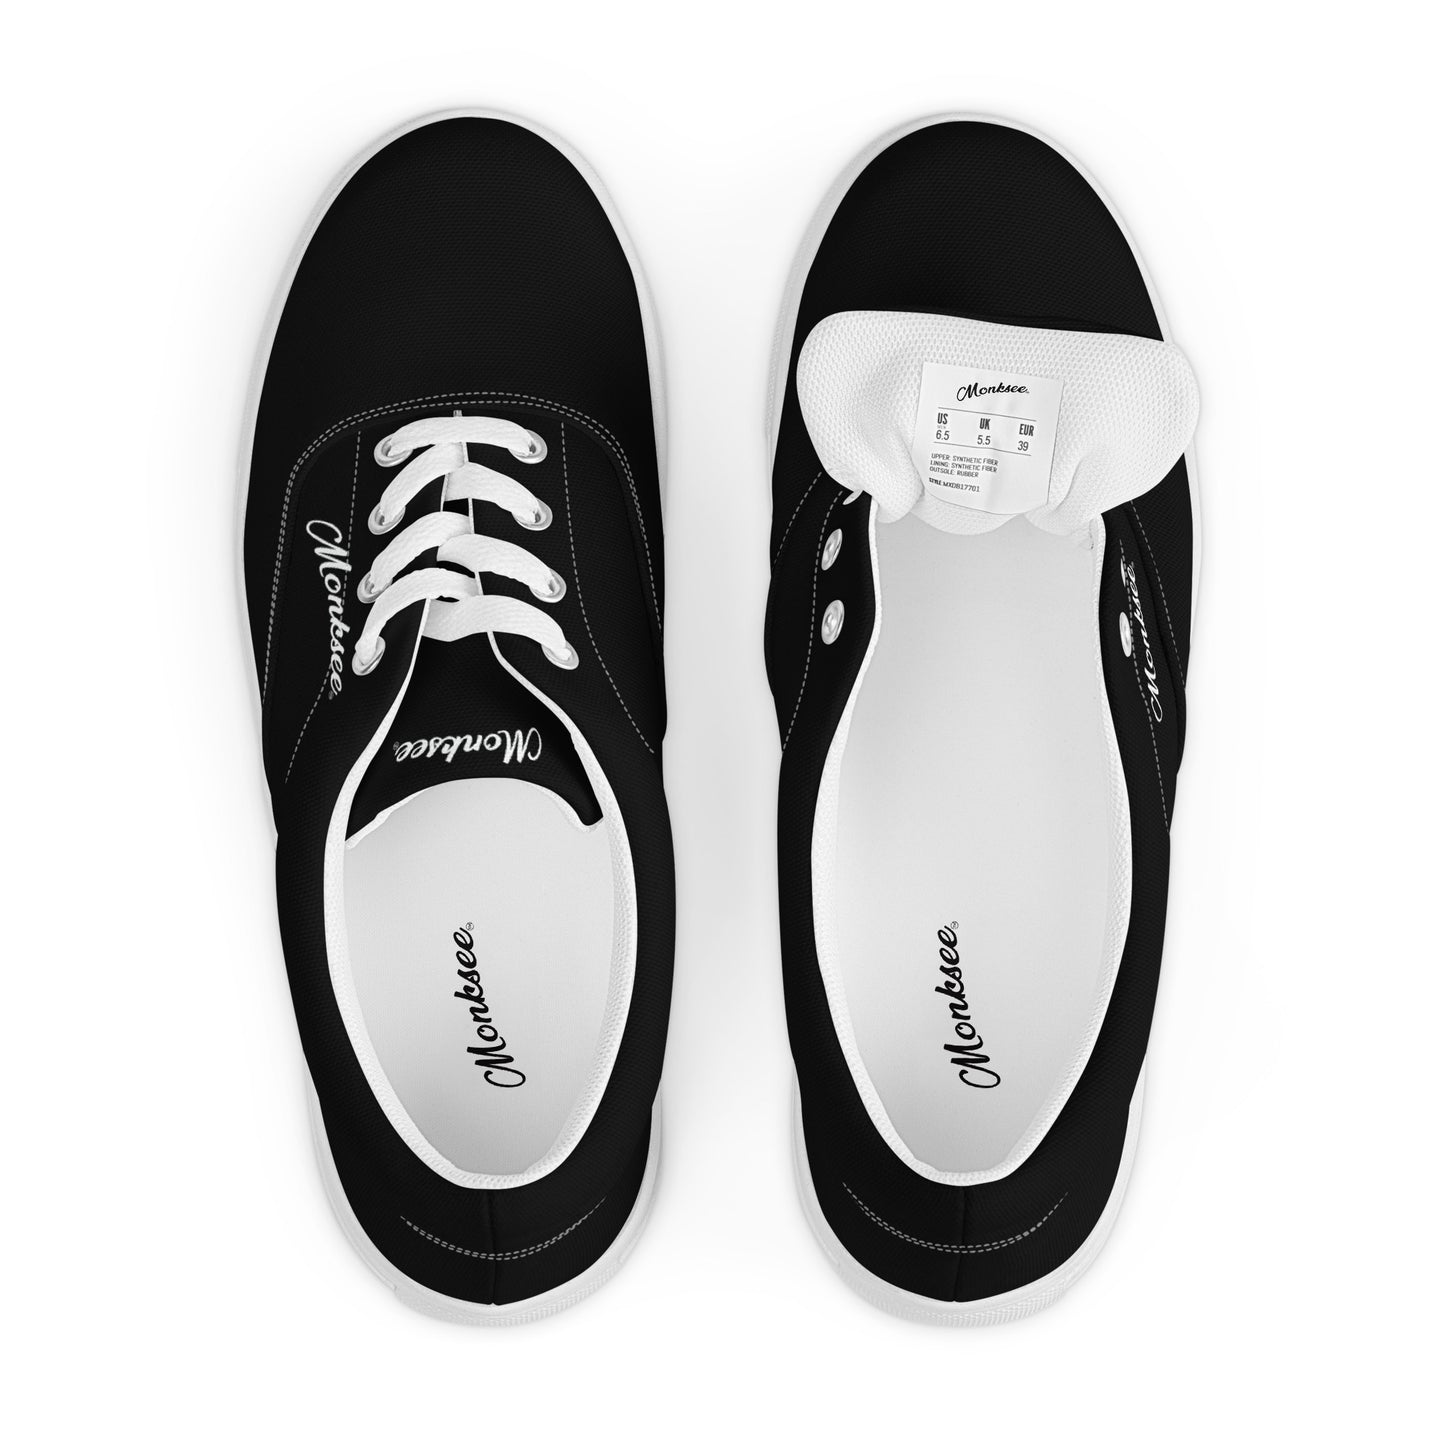 Stoked black lace-ups.